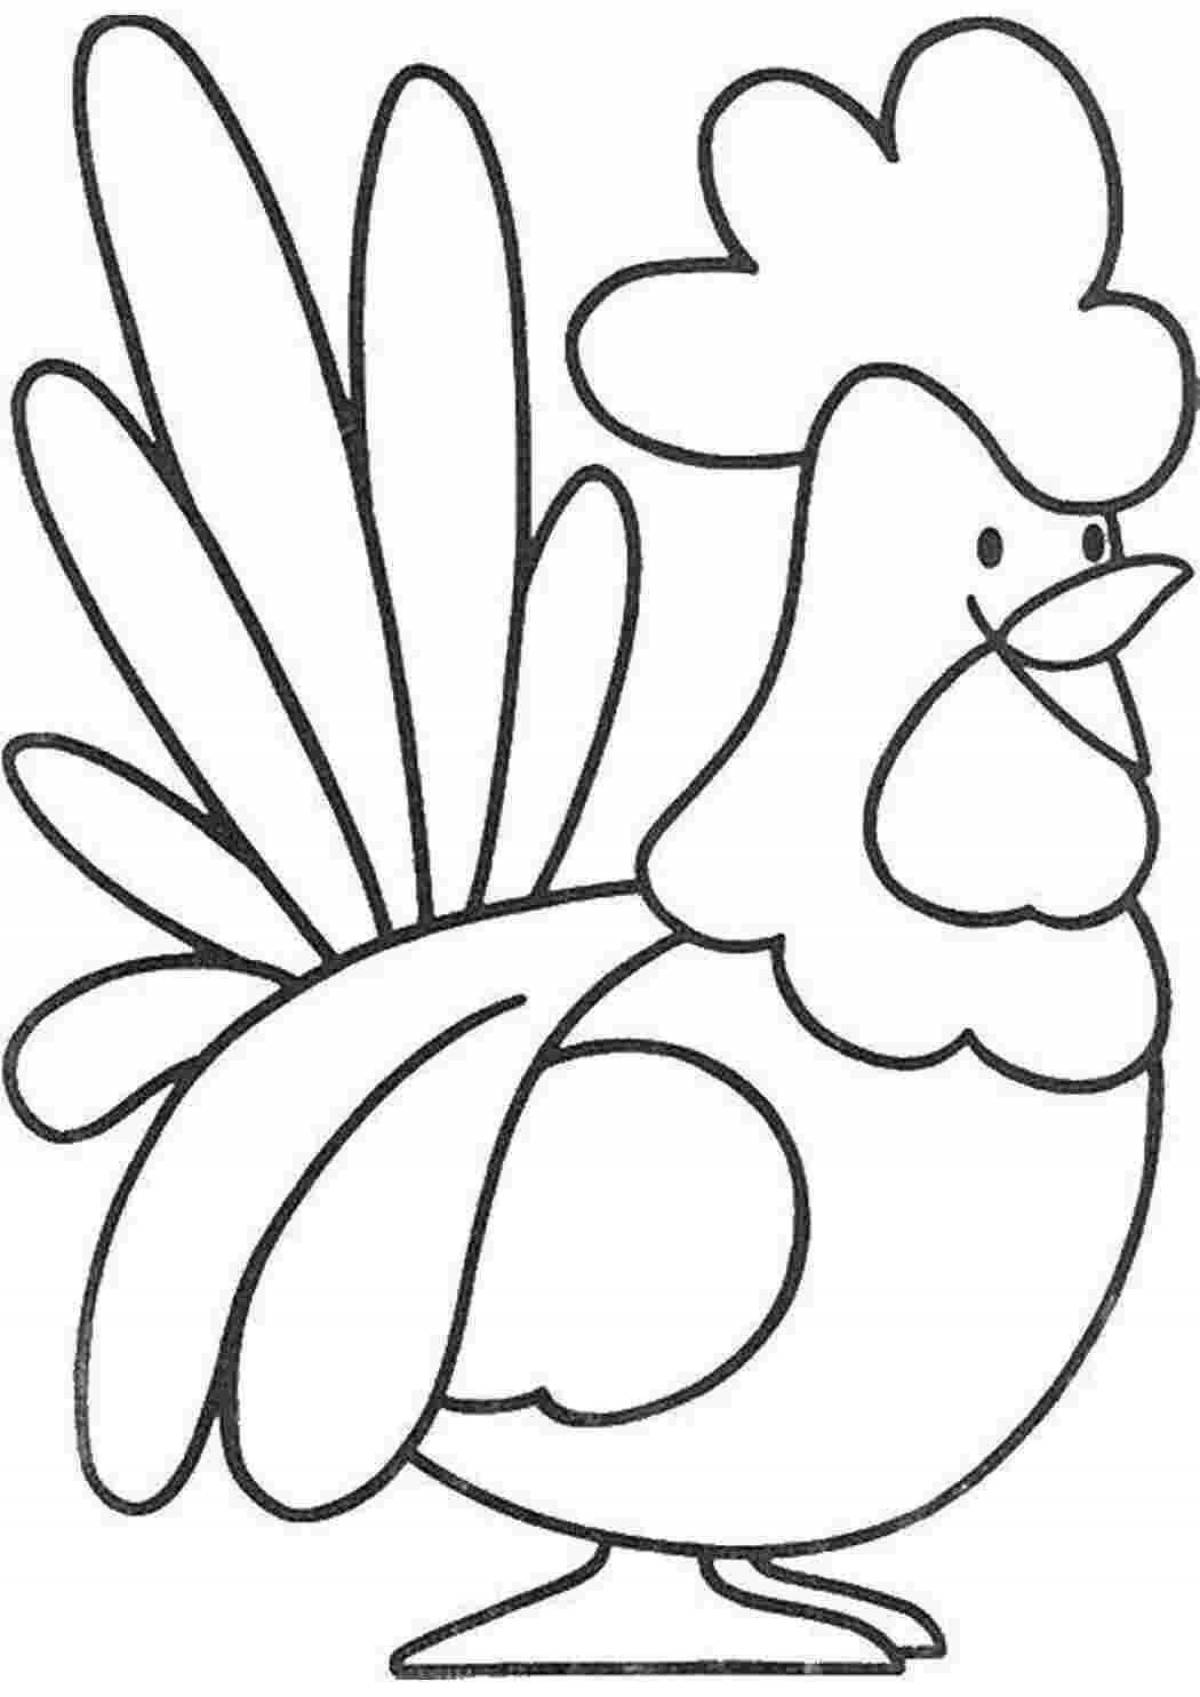 Fabulous rooster coloring book for children 3-4 years old